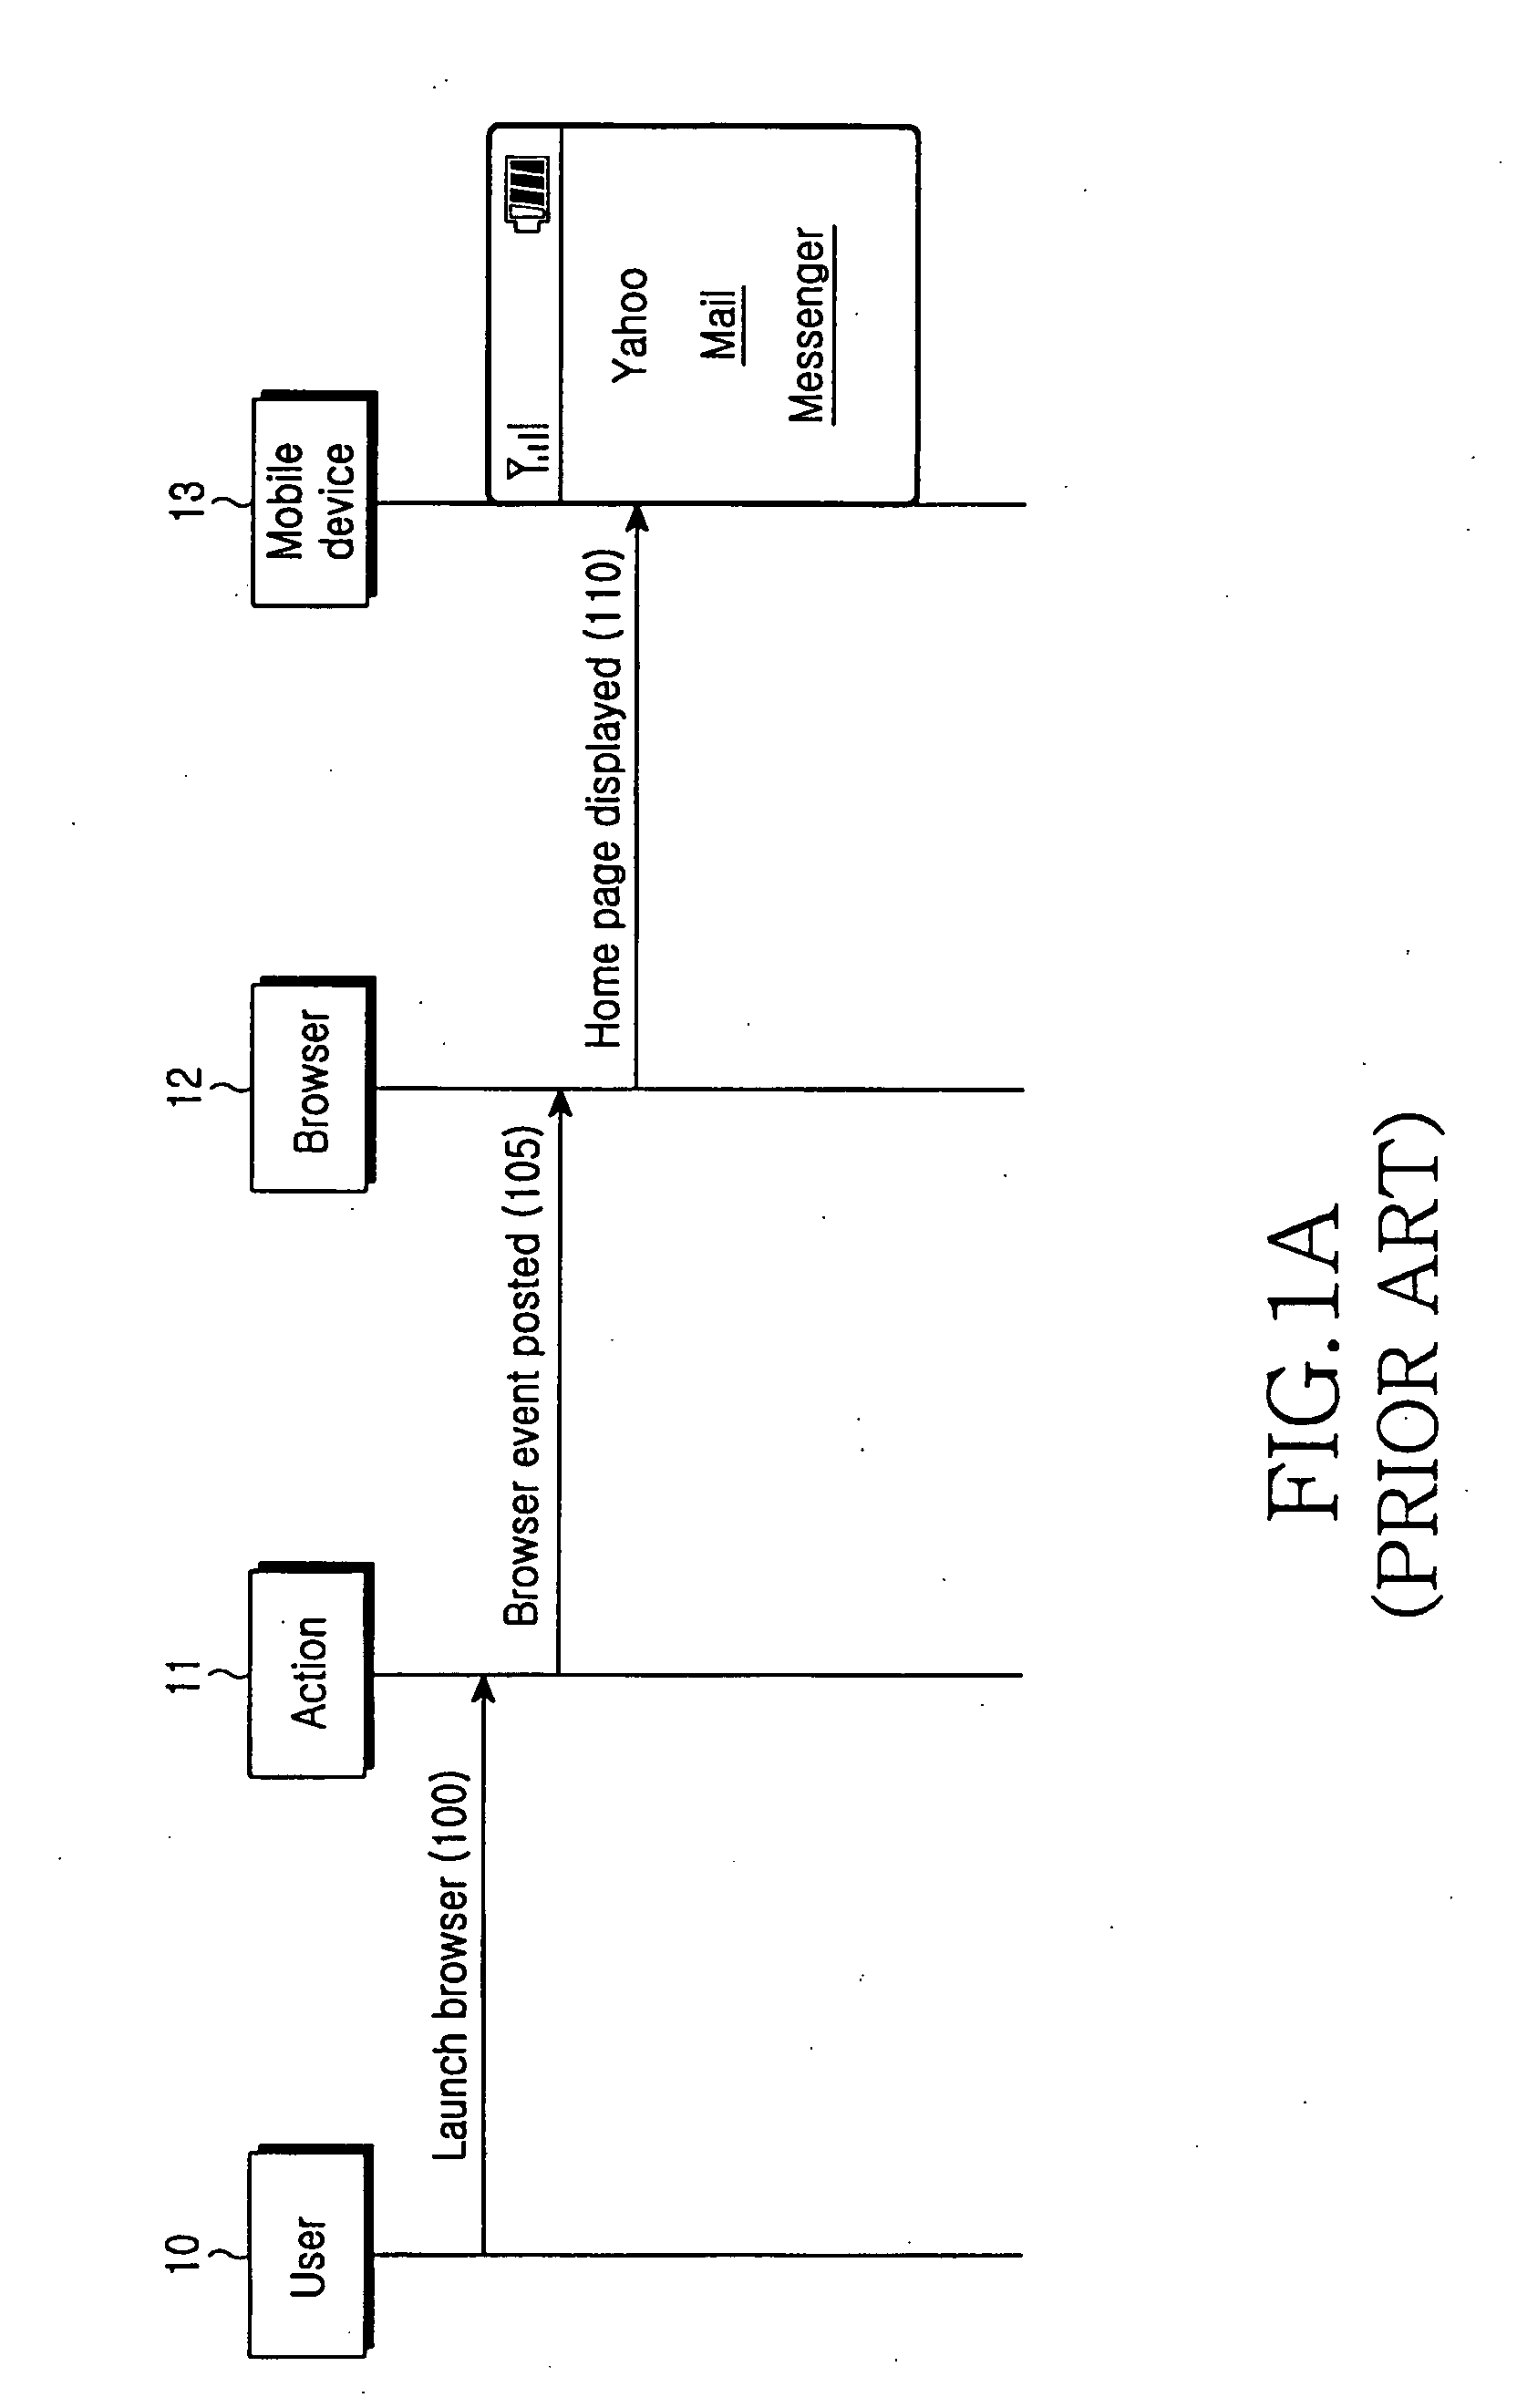 Method and system of browsing using smart browsing  cache